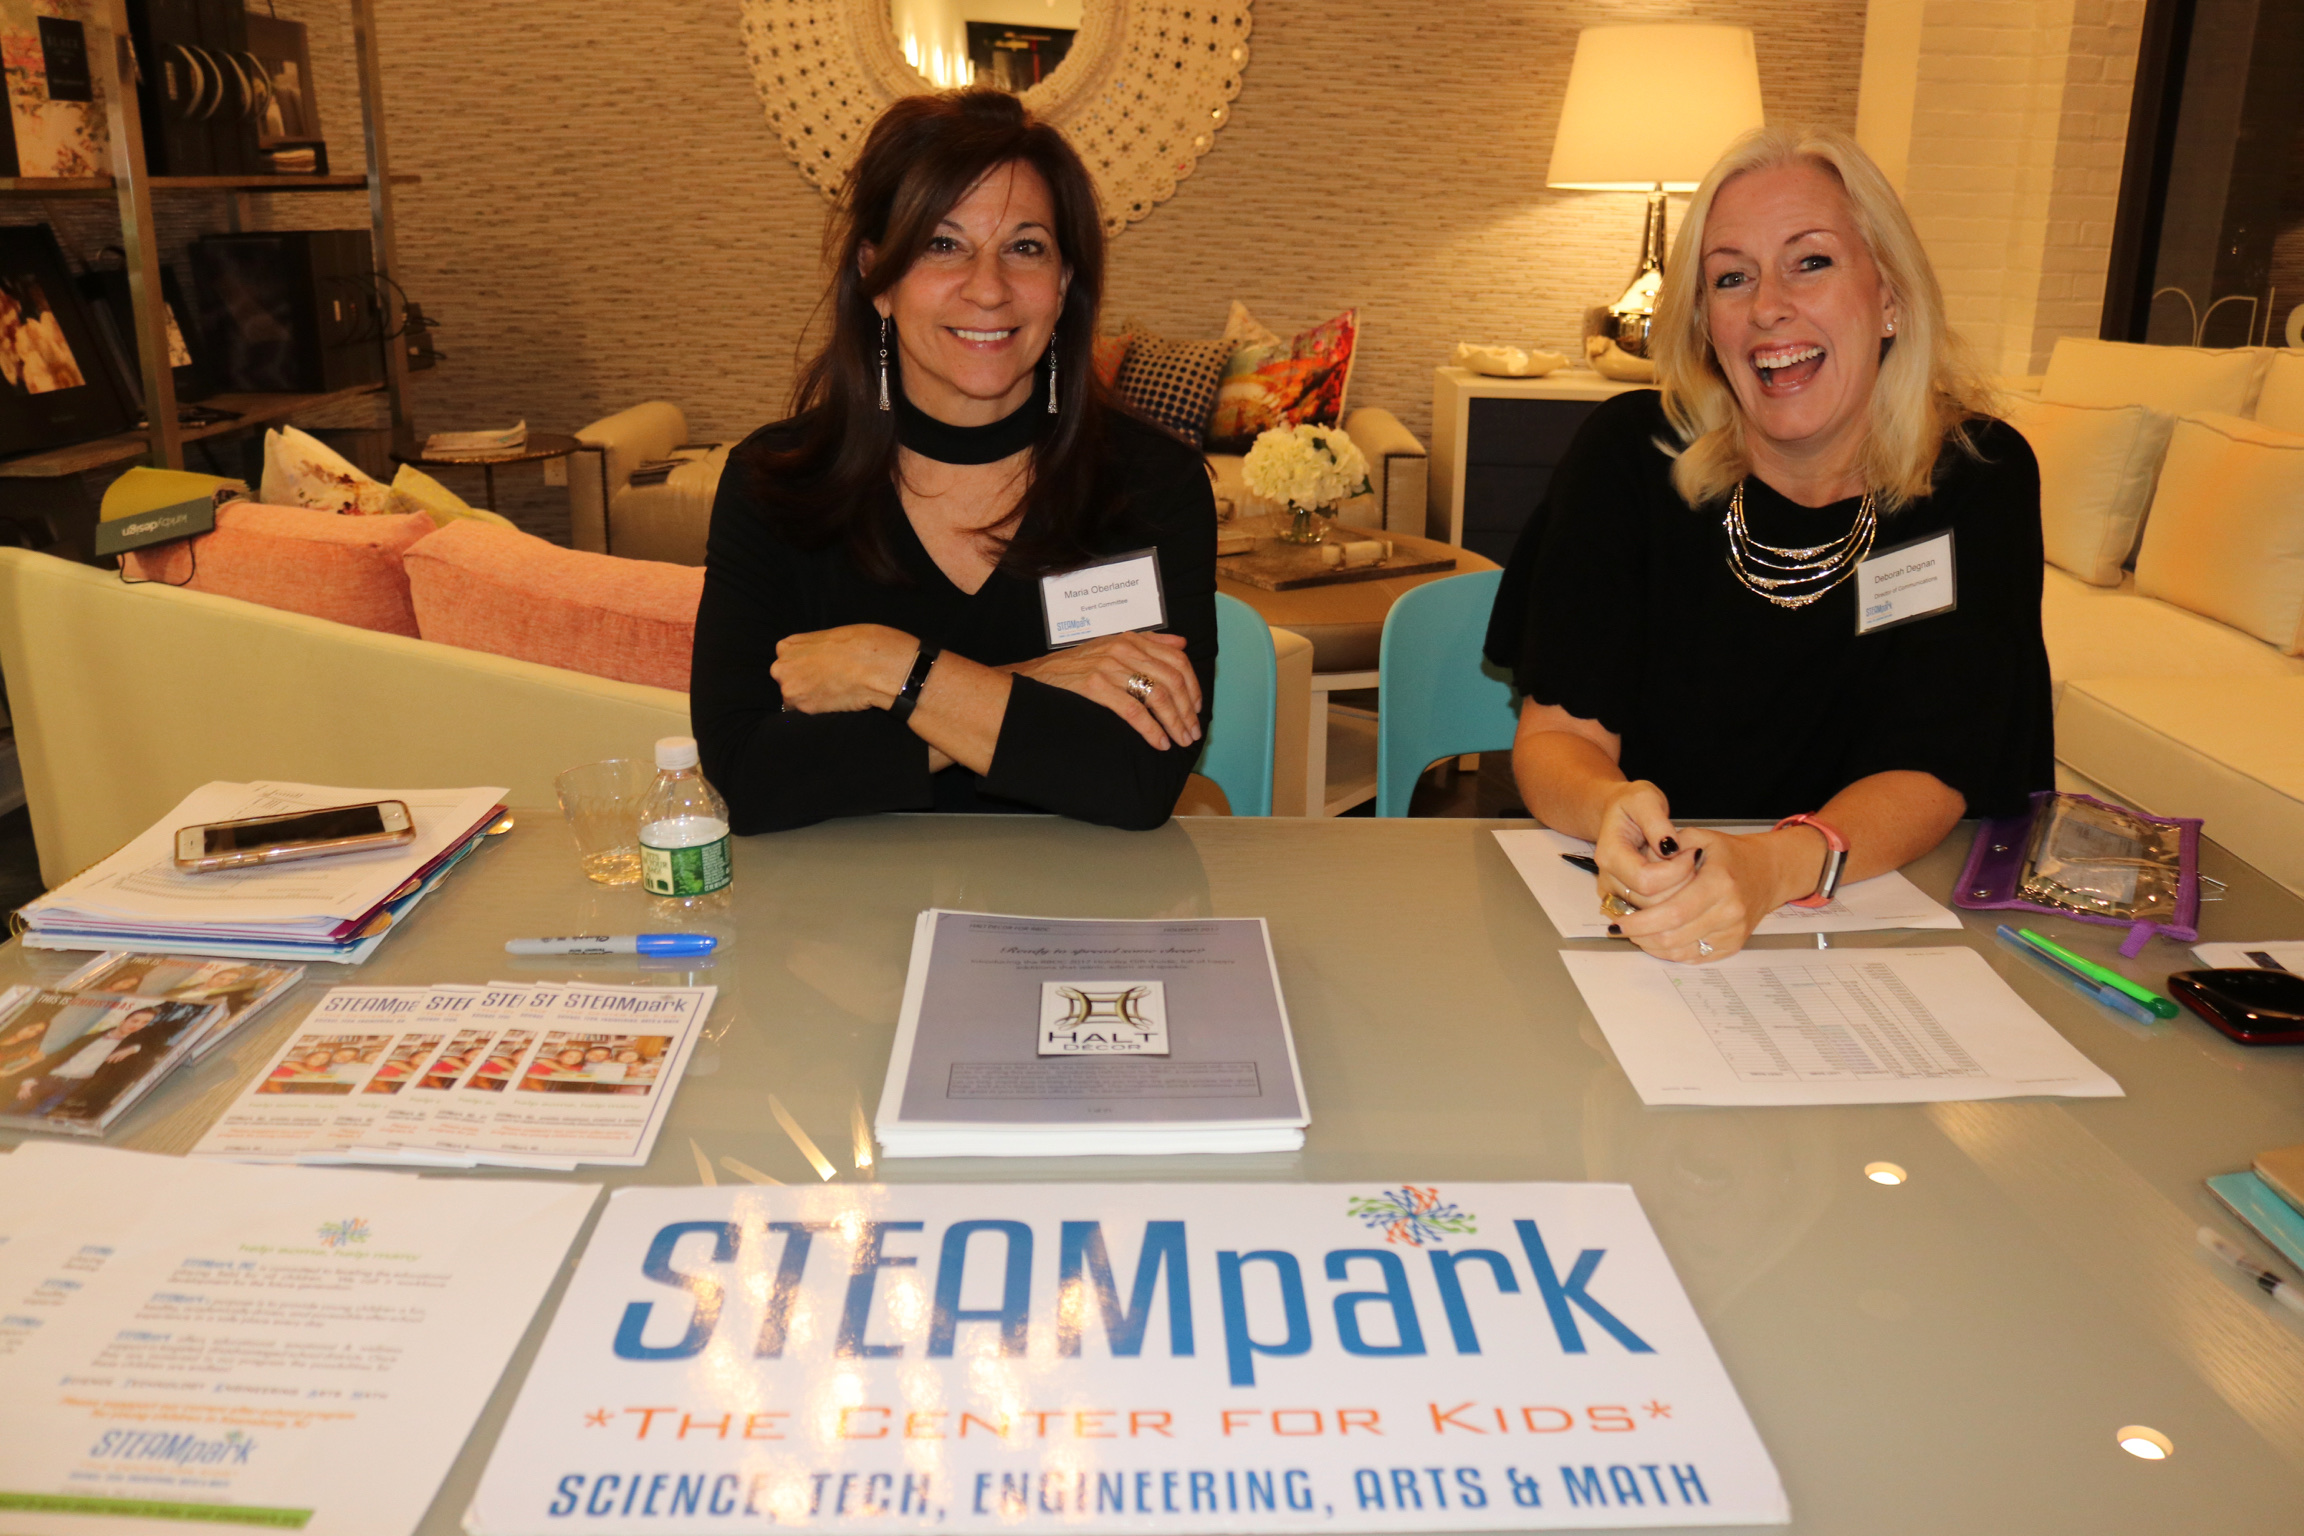 Registration Table at The Color of STEAM Event